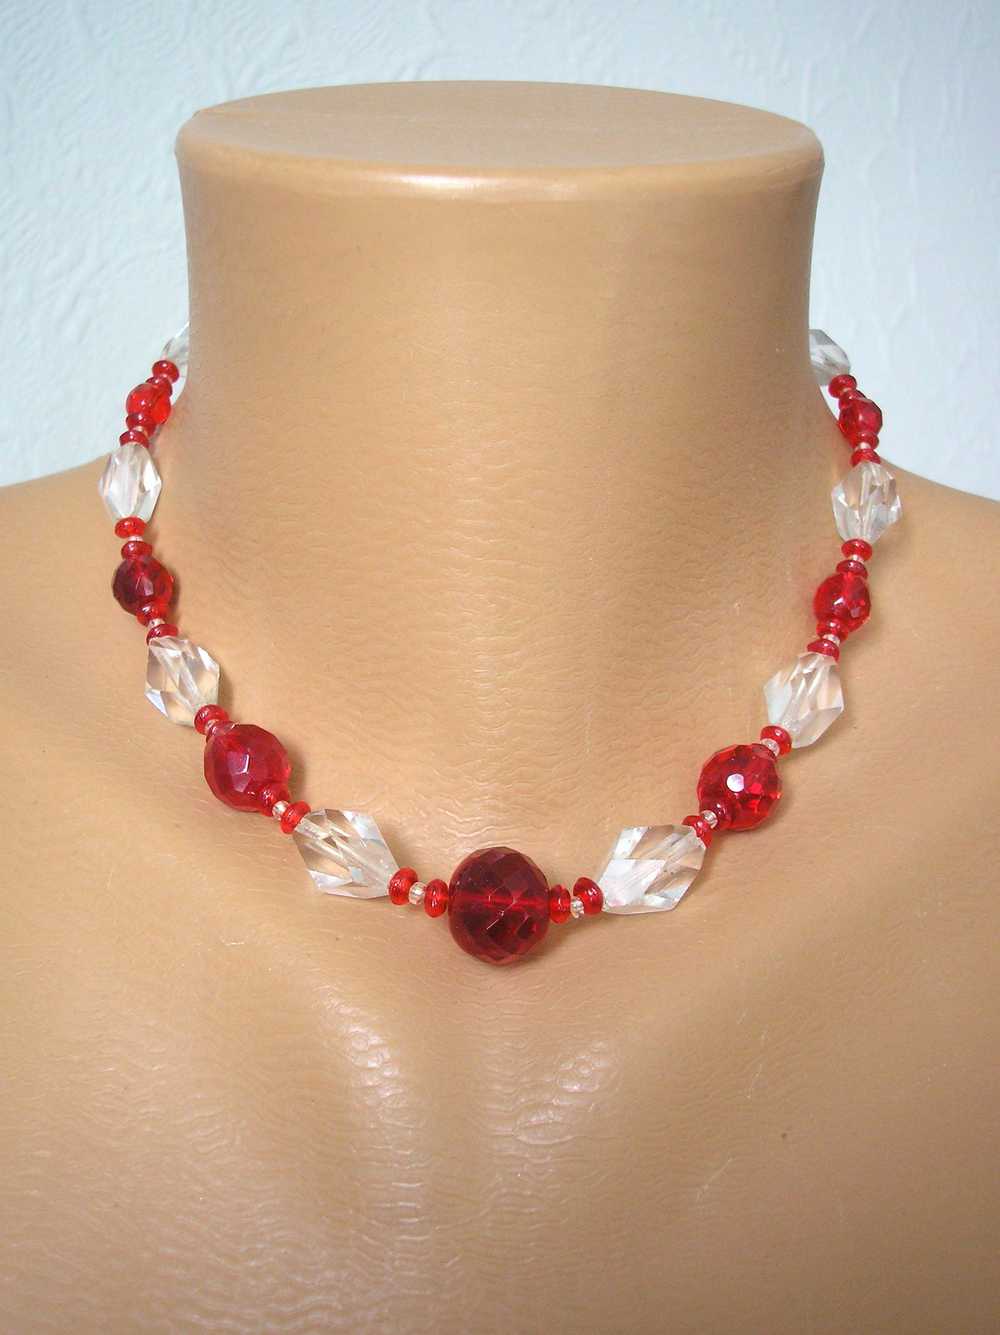 ART DECO 1920's/30's Red Cut Glass Necklace - image 2